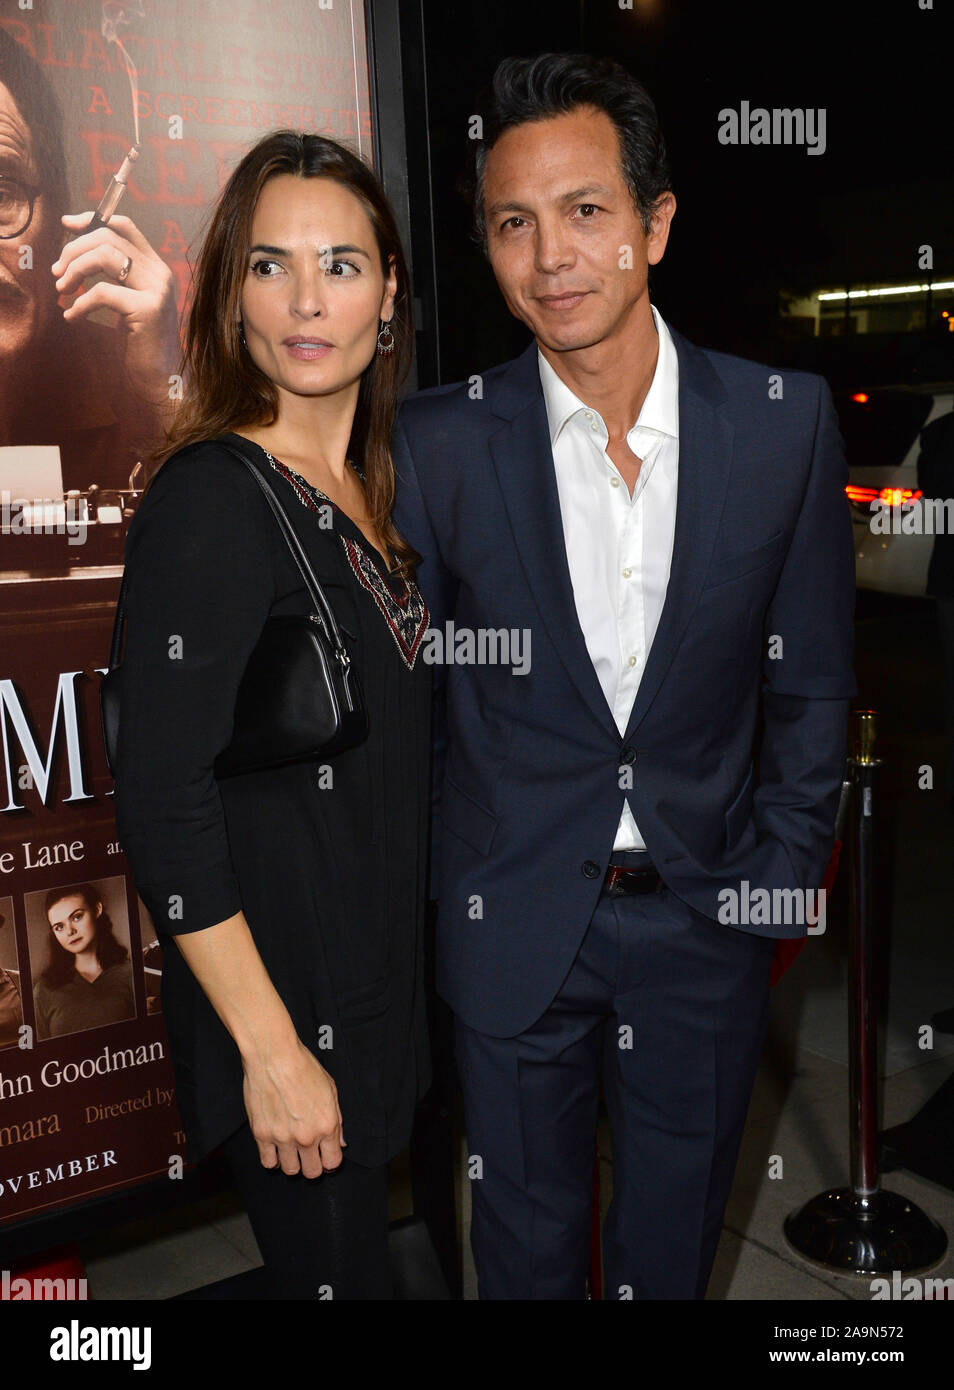 BEVERLY HILLS, CA - OCTOBER 27, 2015: Benjamin Bratt & wife Talisa Soto at the US premiere of 'Trumbo' at the Academy of Motion Picture Arts & Sciences © 2015 Paul Smith / Featureflash Stock Photo